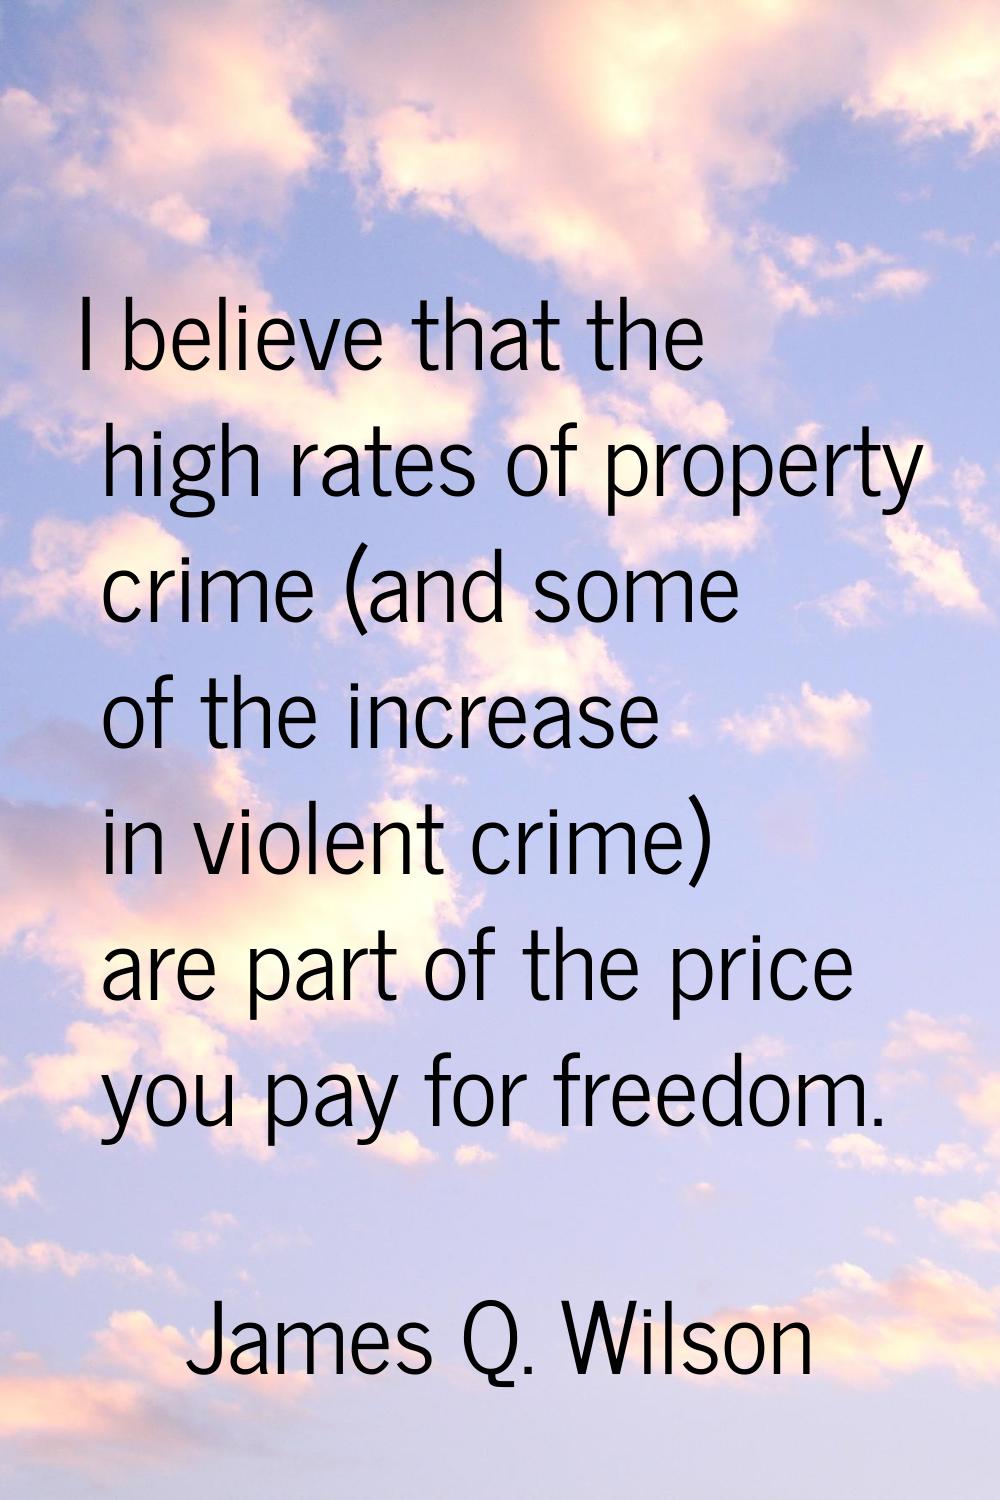 I believe that the high rates of property crime (and some of the increase in violent crime) are par